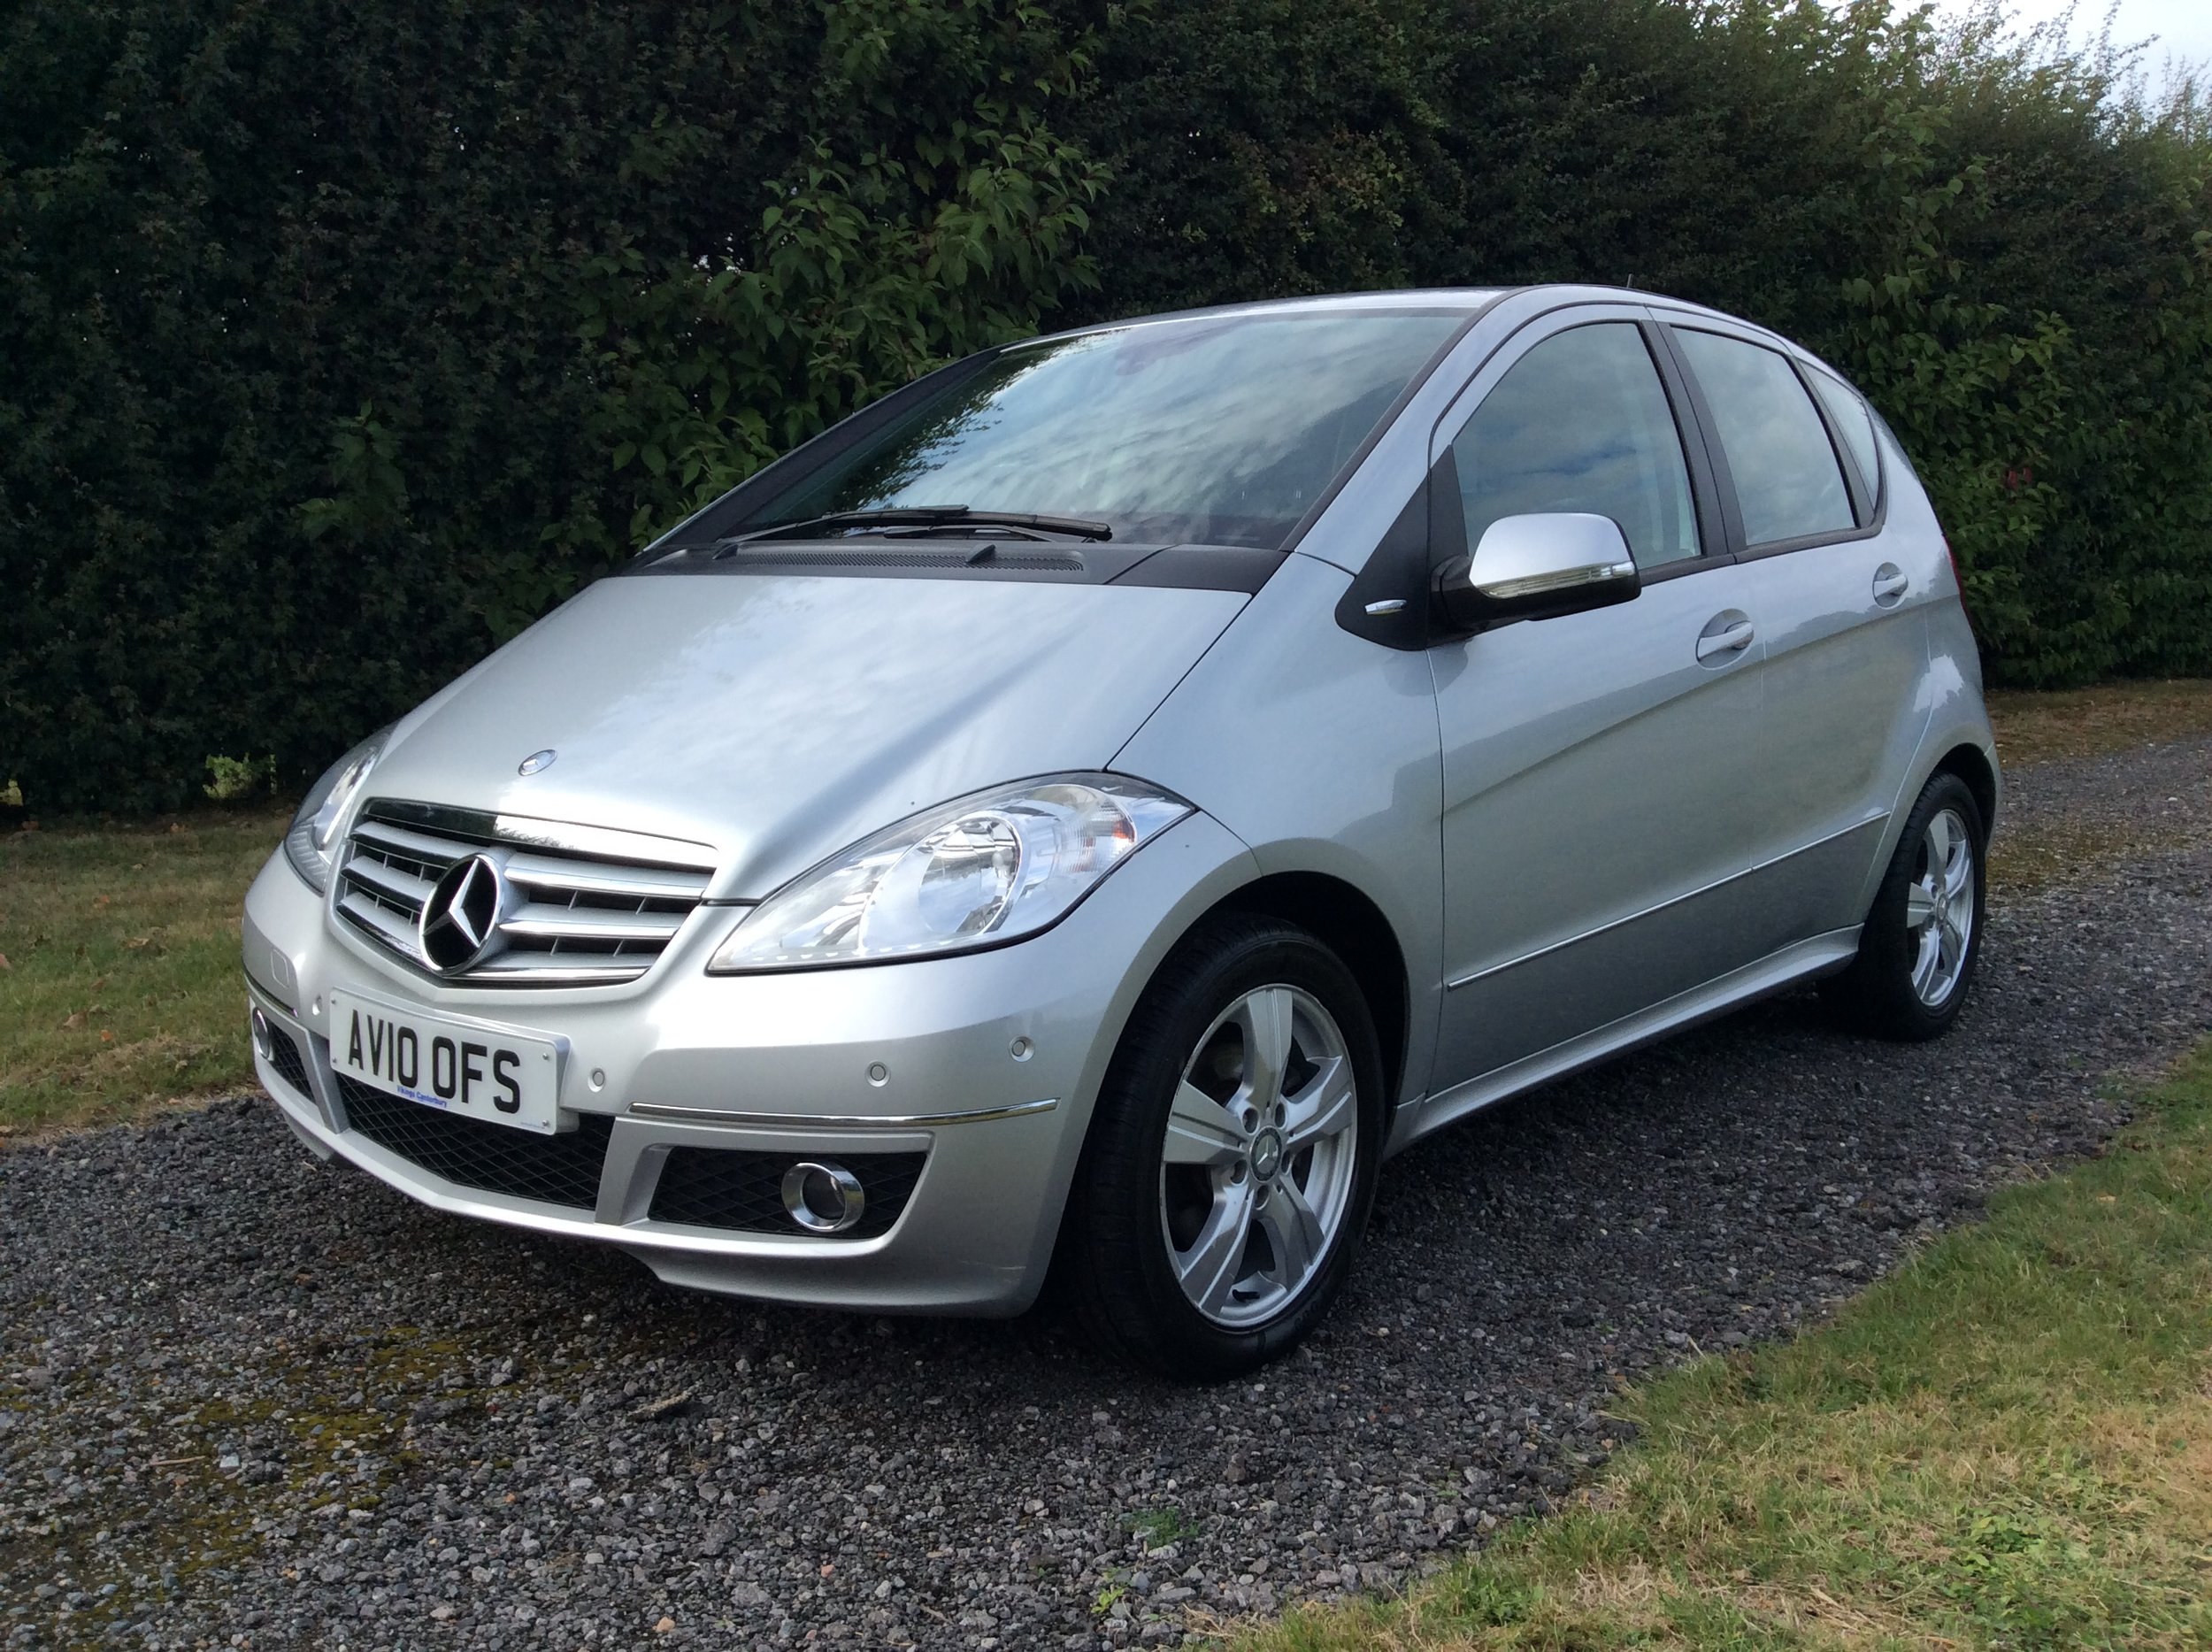 Mercedes A180 CDI - really low miles